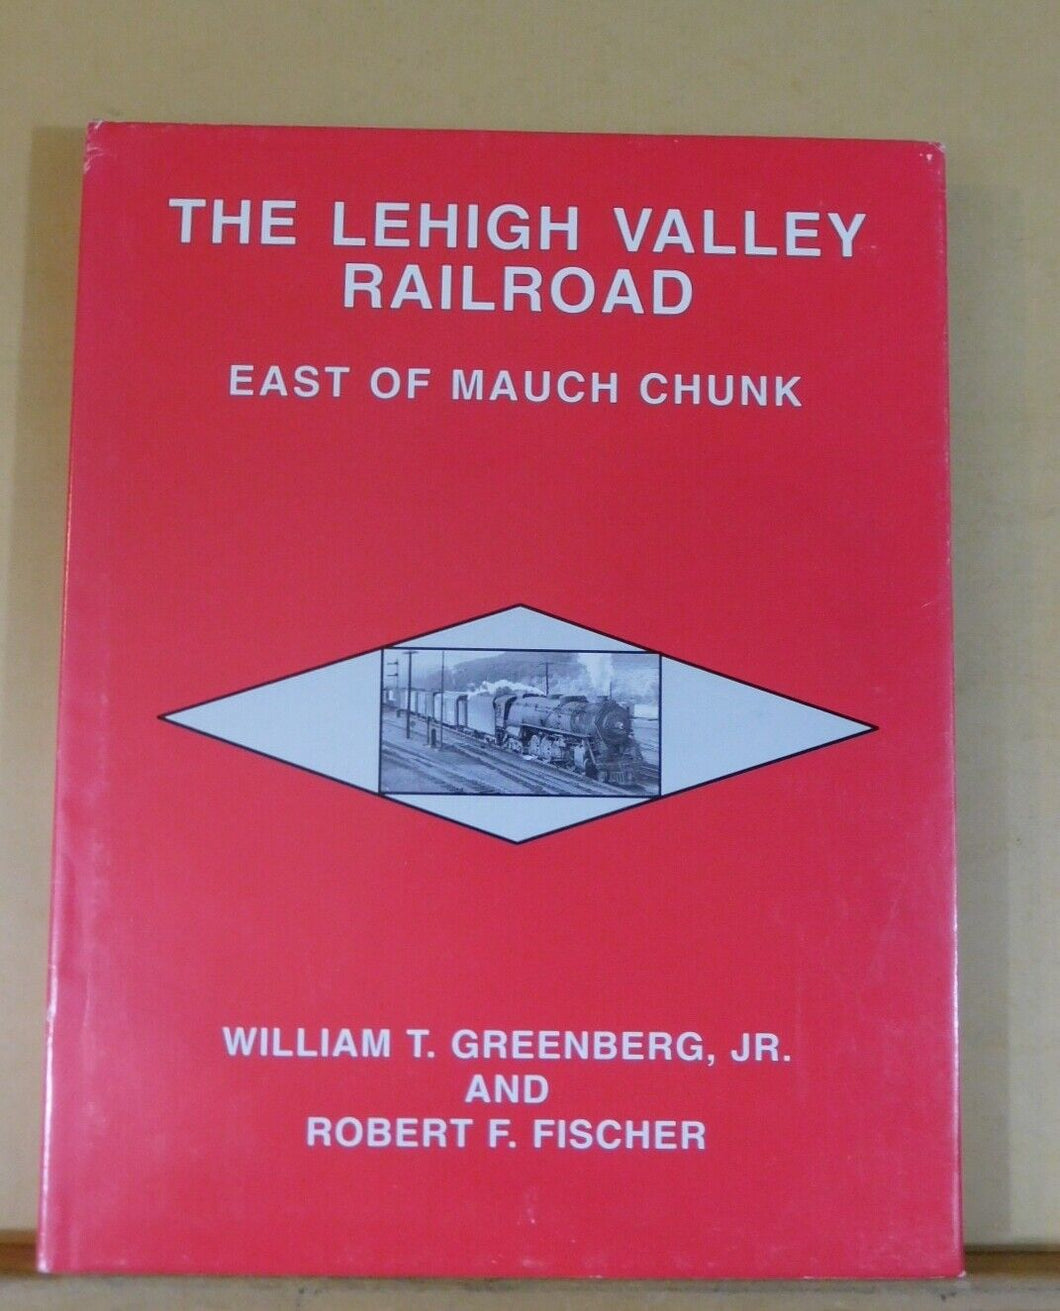 Lehigh Valley Railroad, The   East of Mauch Chunk by Greenberg Jr & Fischer